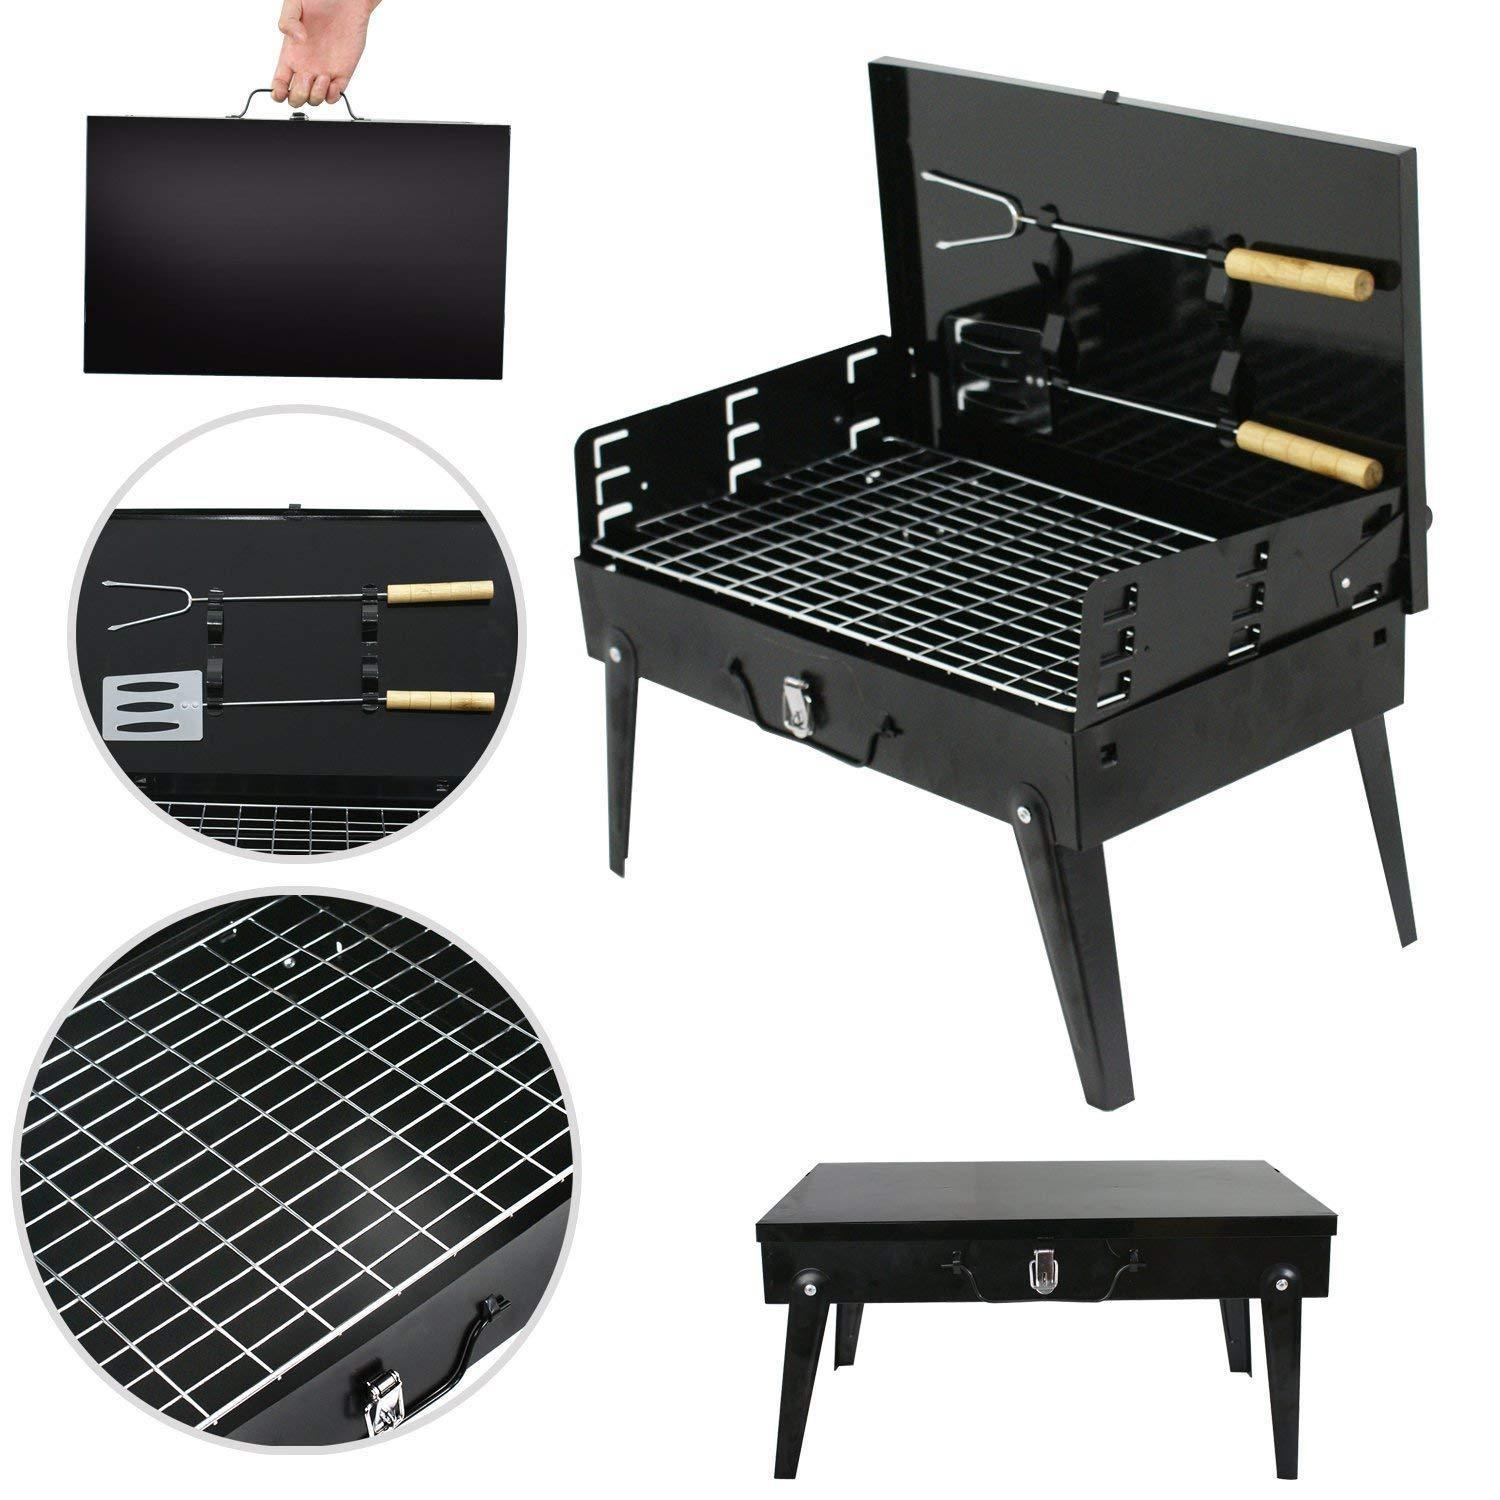 stainless-steel-briefcase-style-barbecue-grill-toaster-medium-black